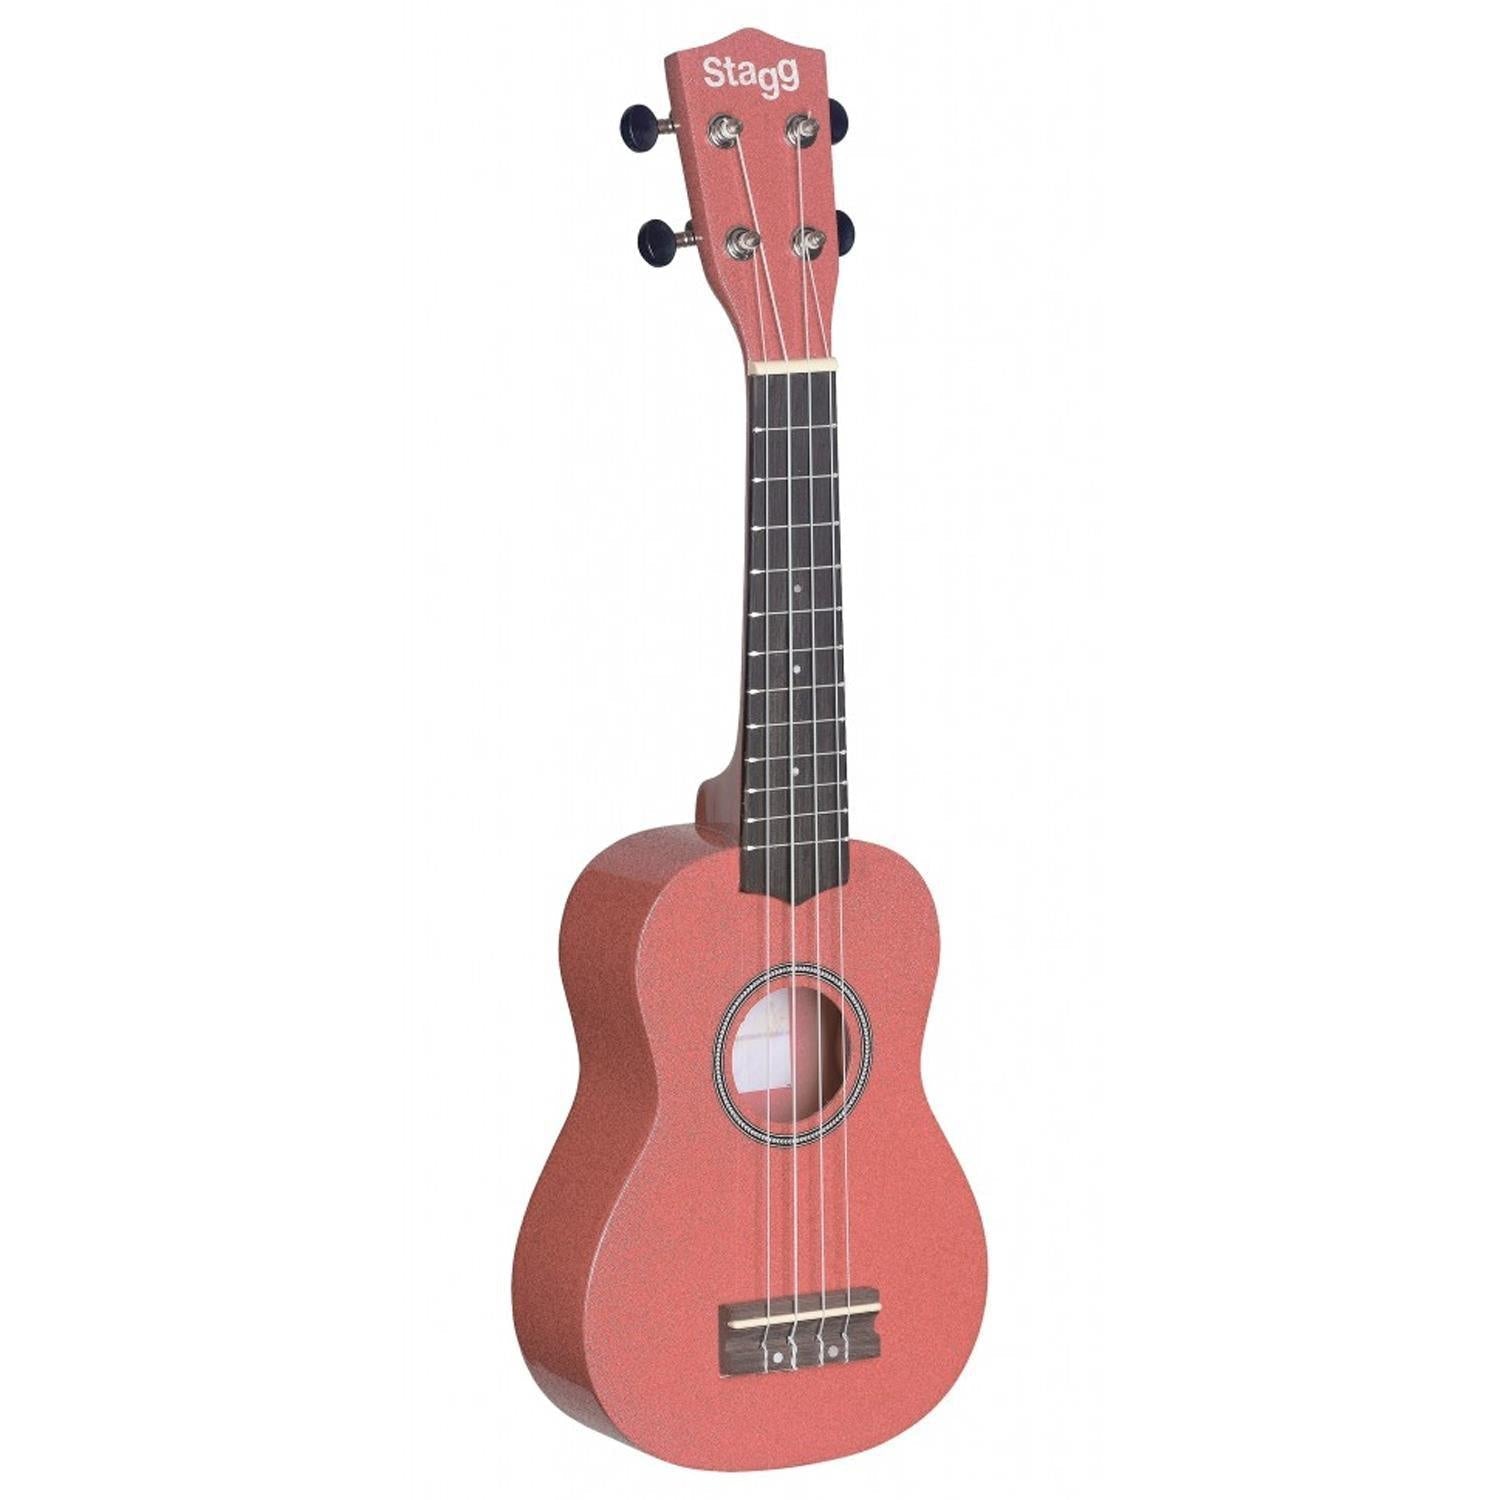 Stagg US-Lips Red Soprano Ukulele With Bag - DY Pro Audio